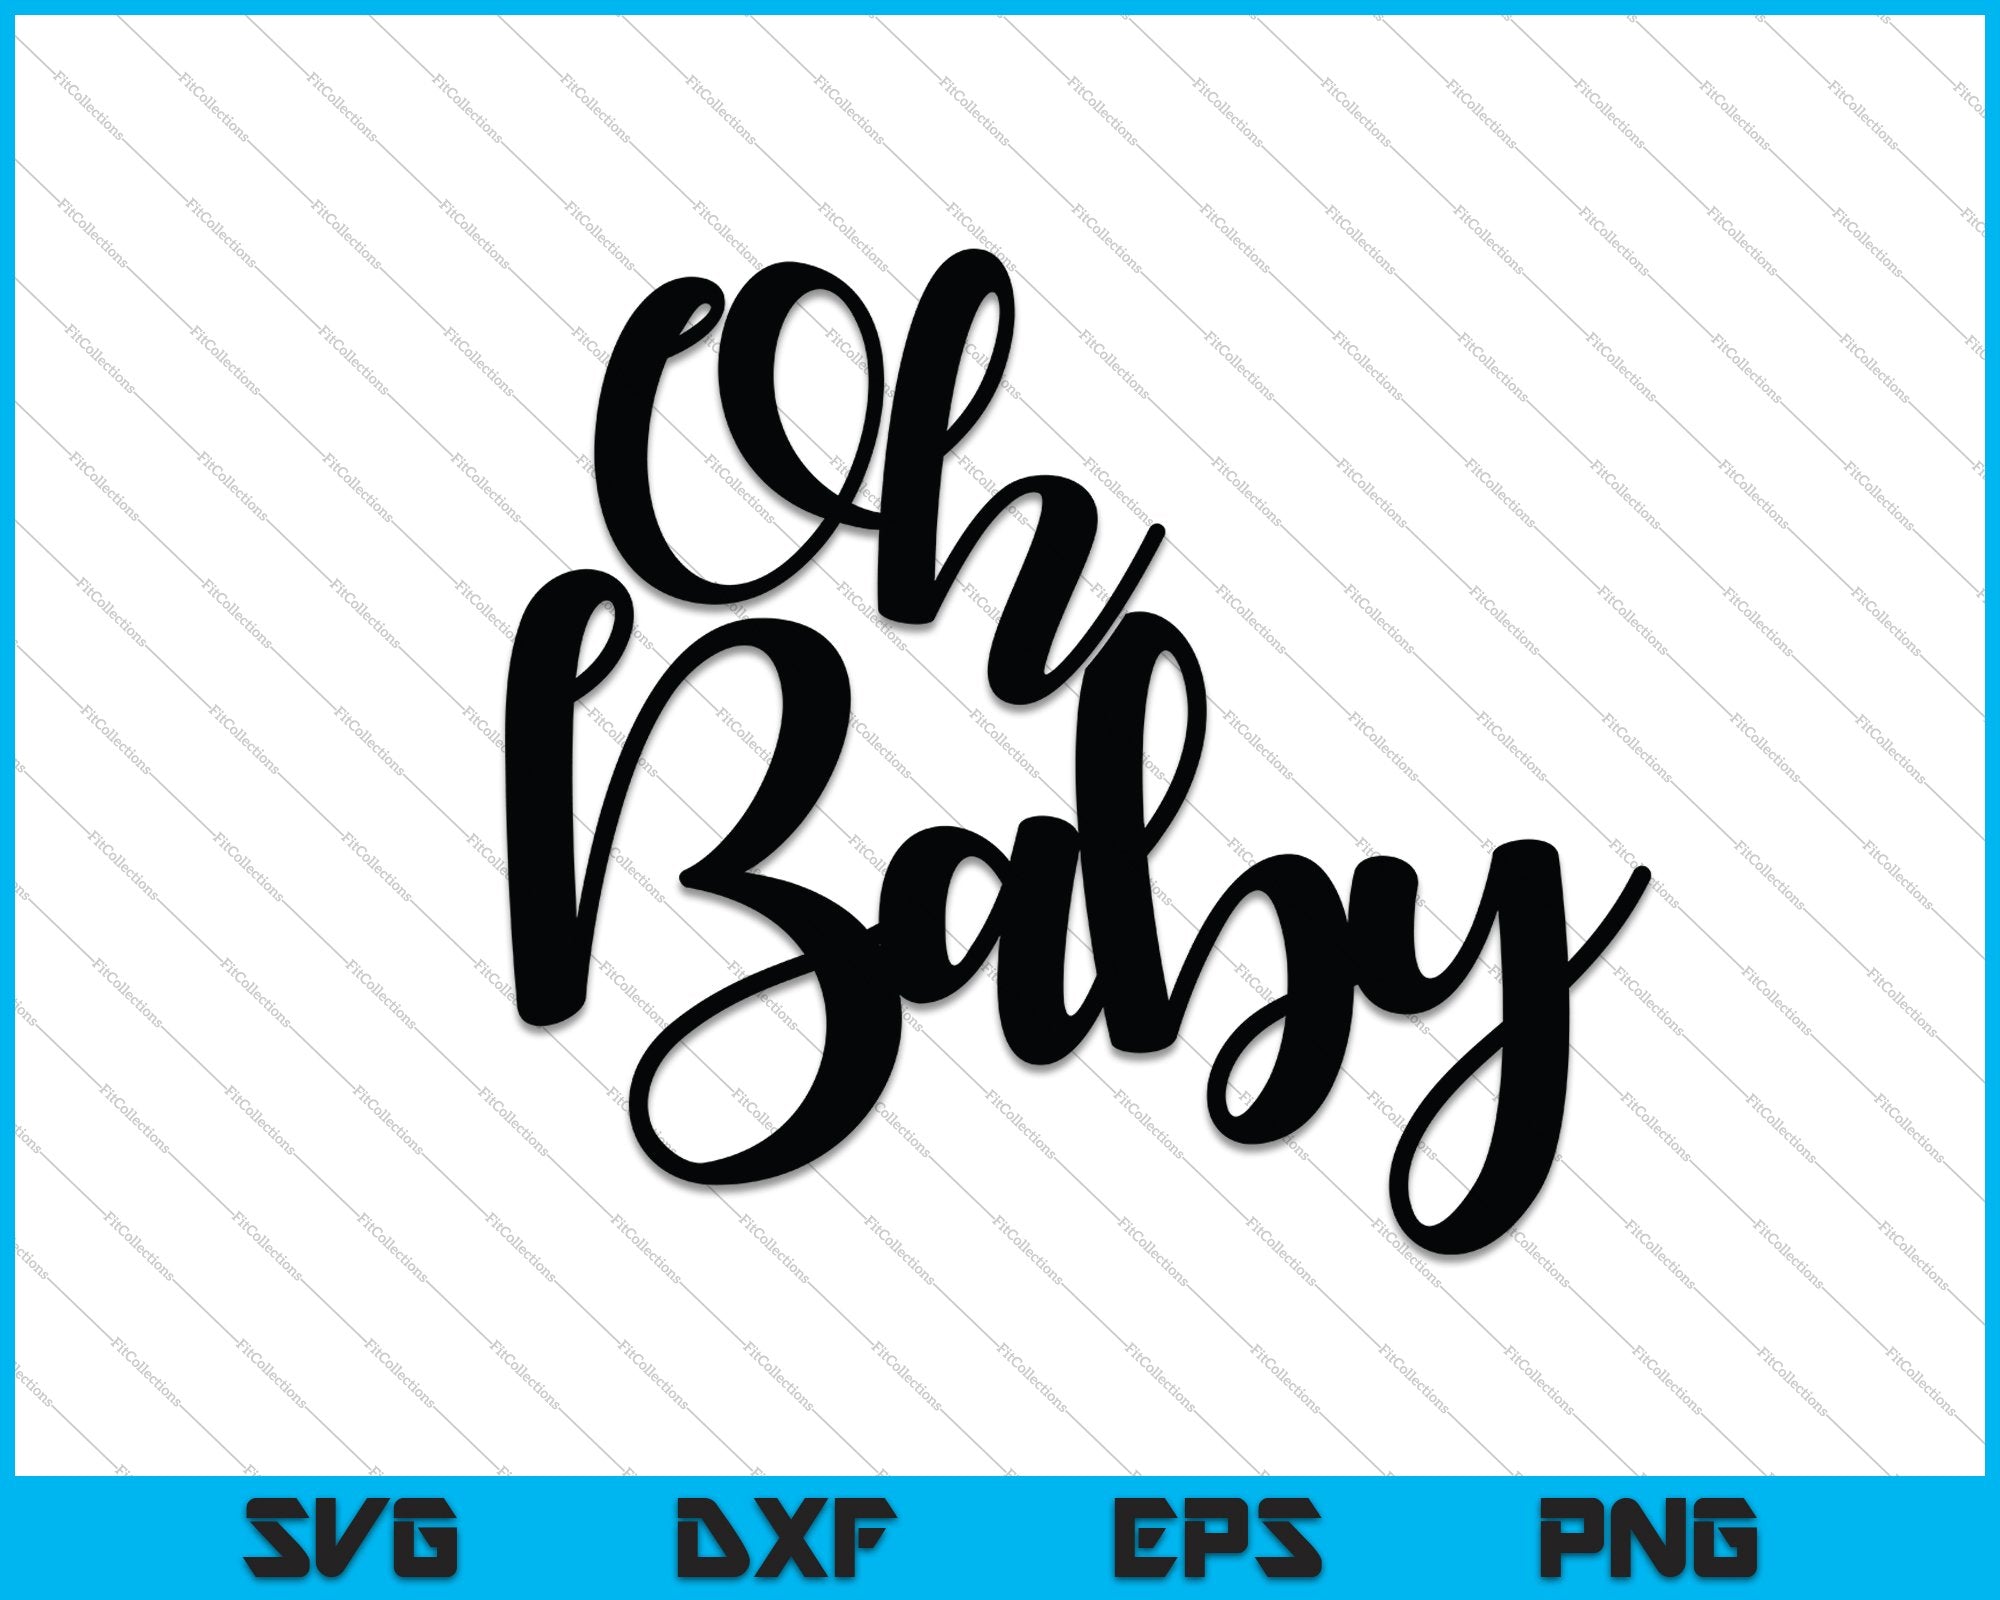 Download Cake Toppers Picks Oh Baby Cake Topper Svg Baby Shower Topper Cricutsilhouette File Png Oh Baby Cake Topper File Digital Download Cake Topper Paper Party Supplies